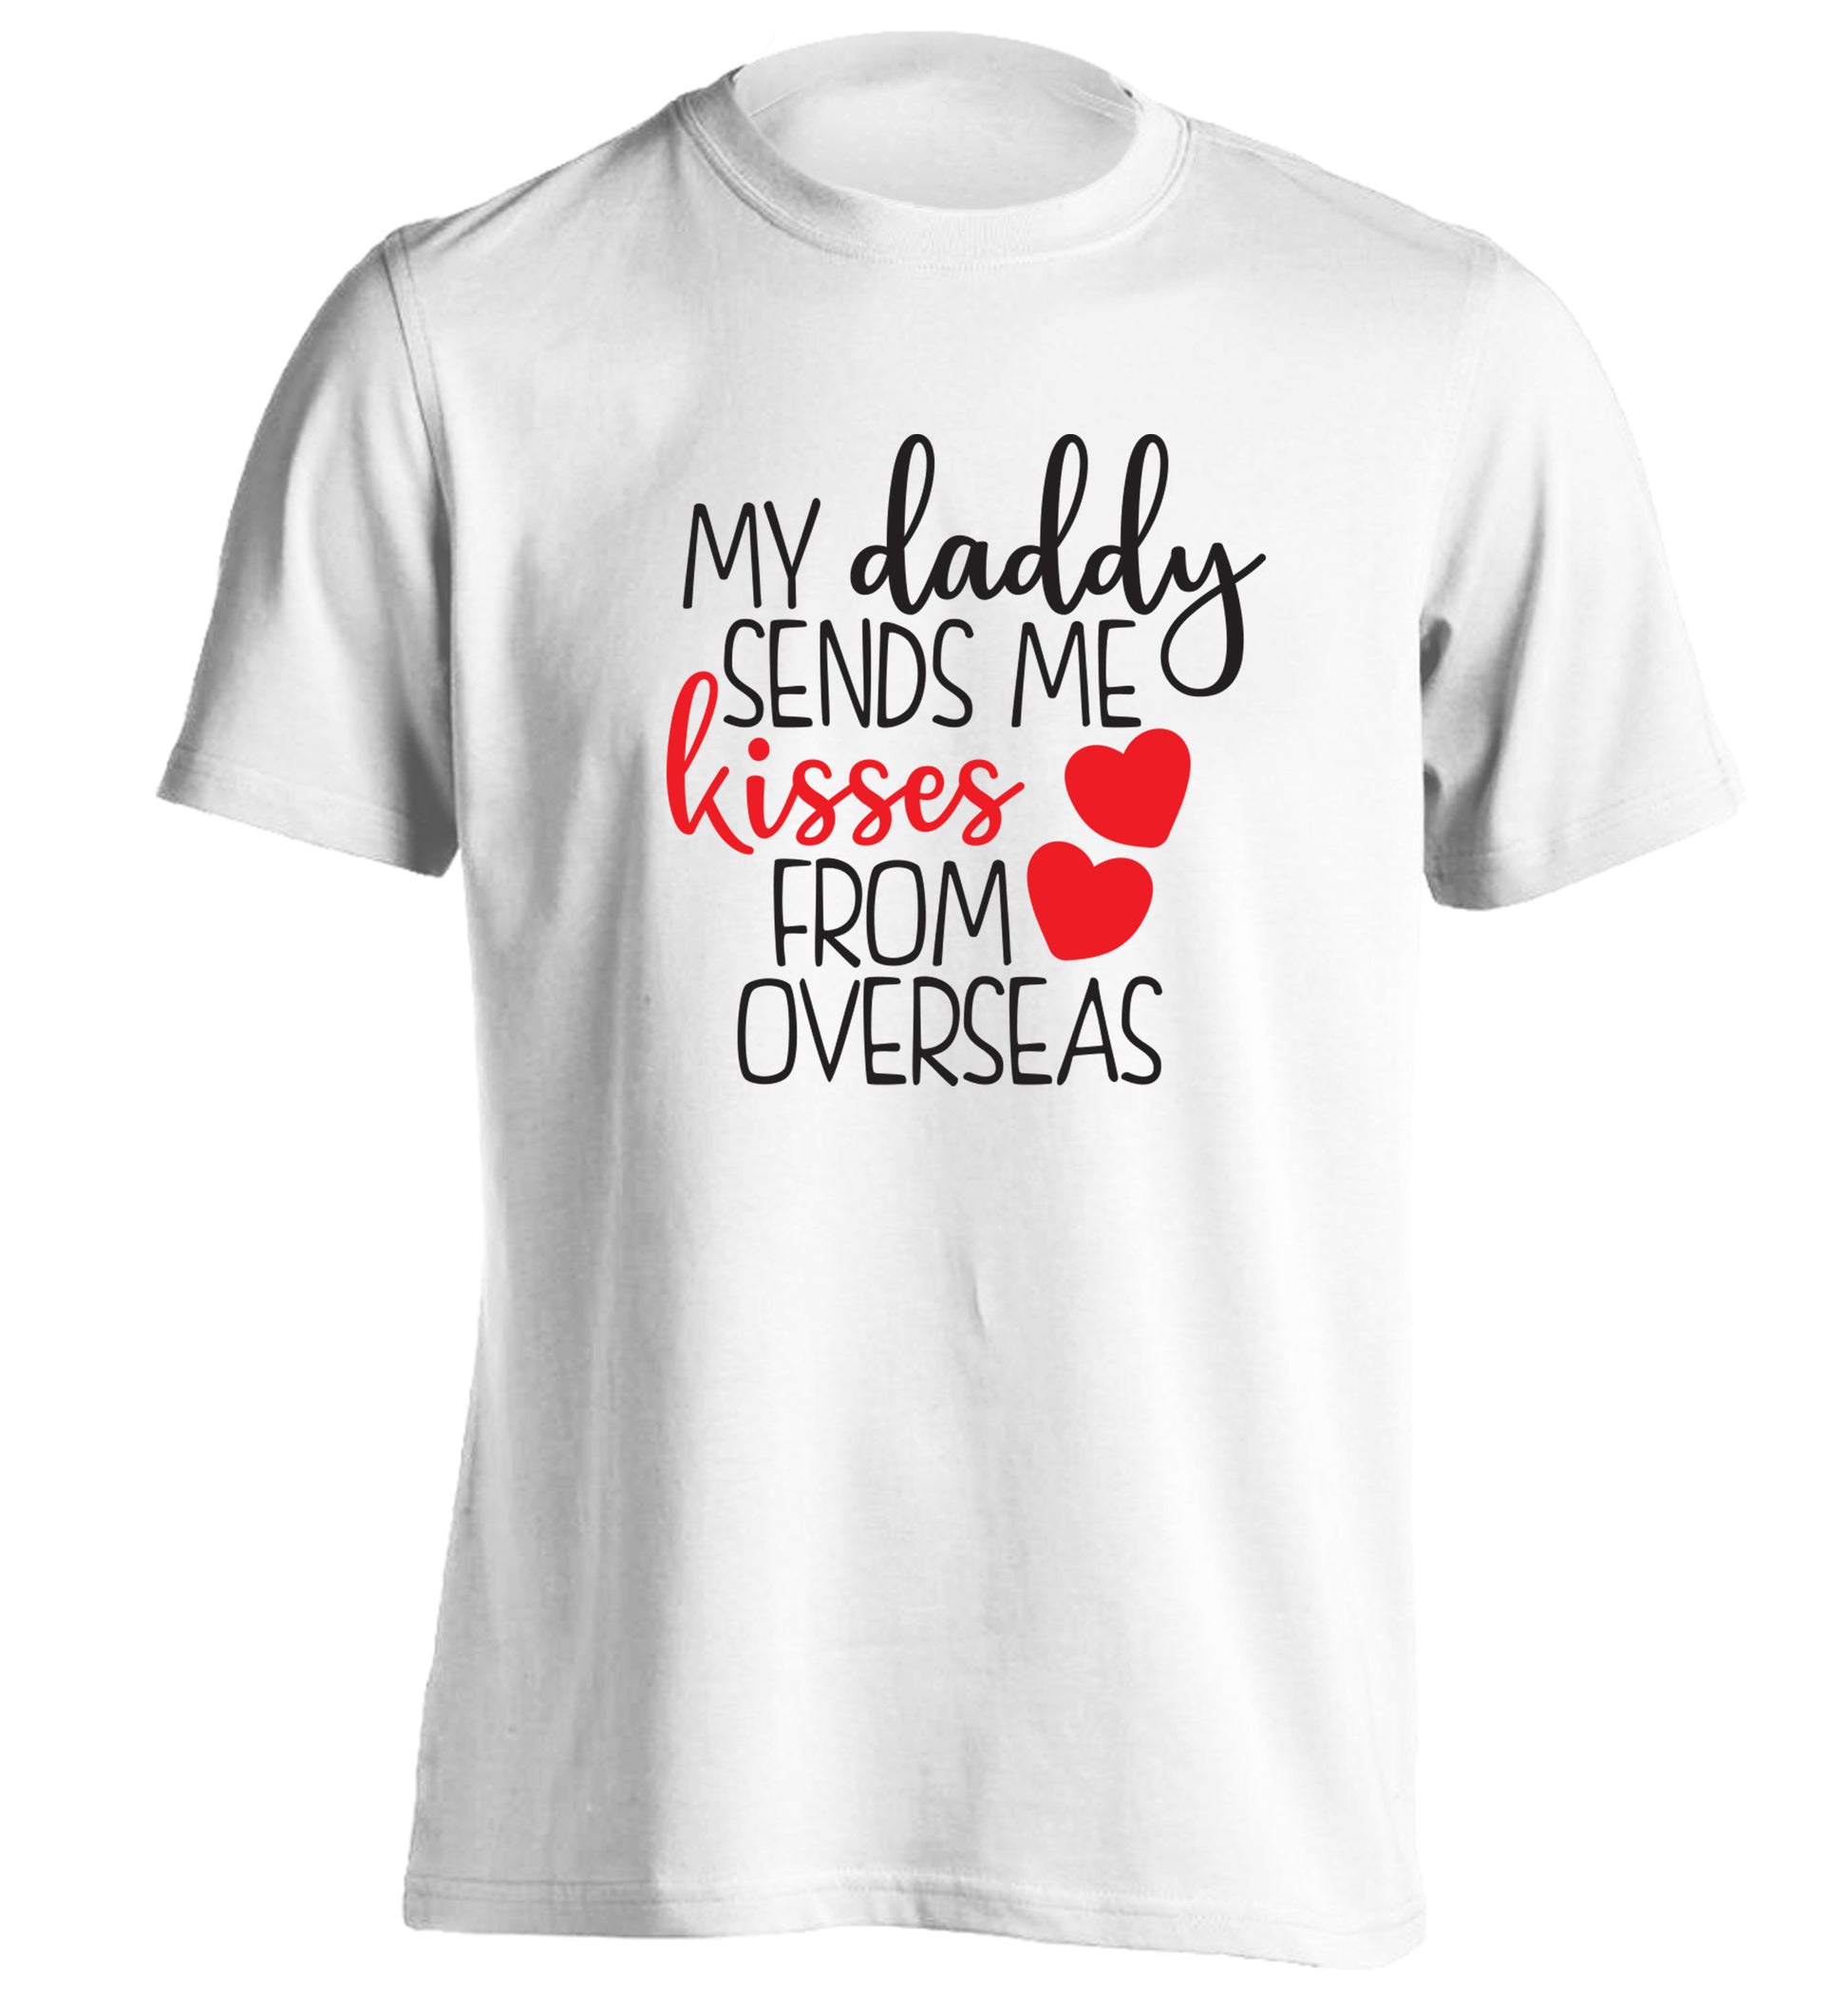 My daddy sends me kisses from overseas adults unisex white Tshirt 2XL